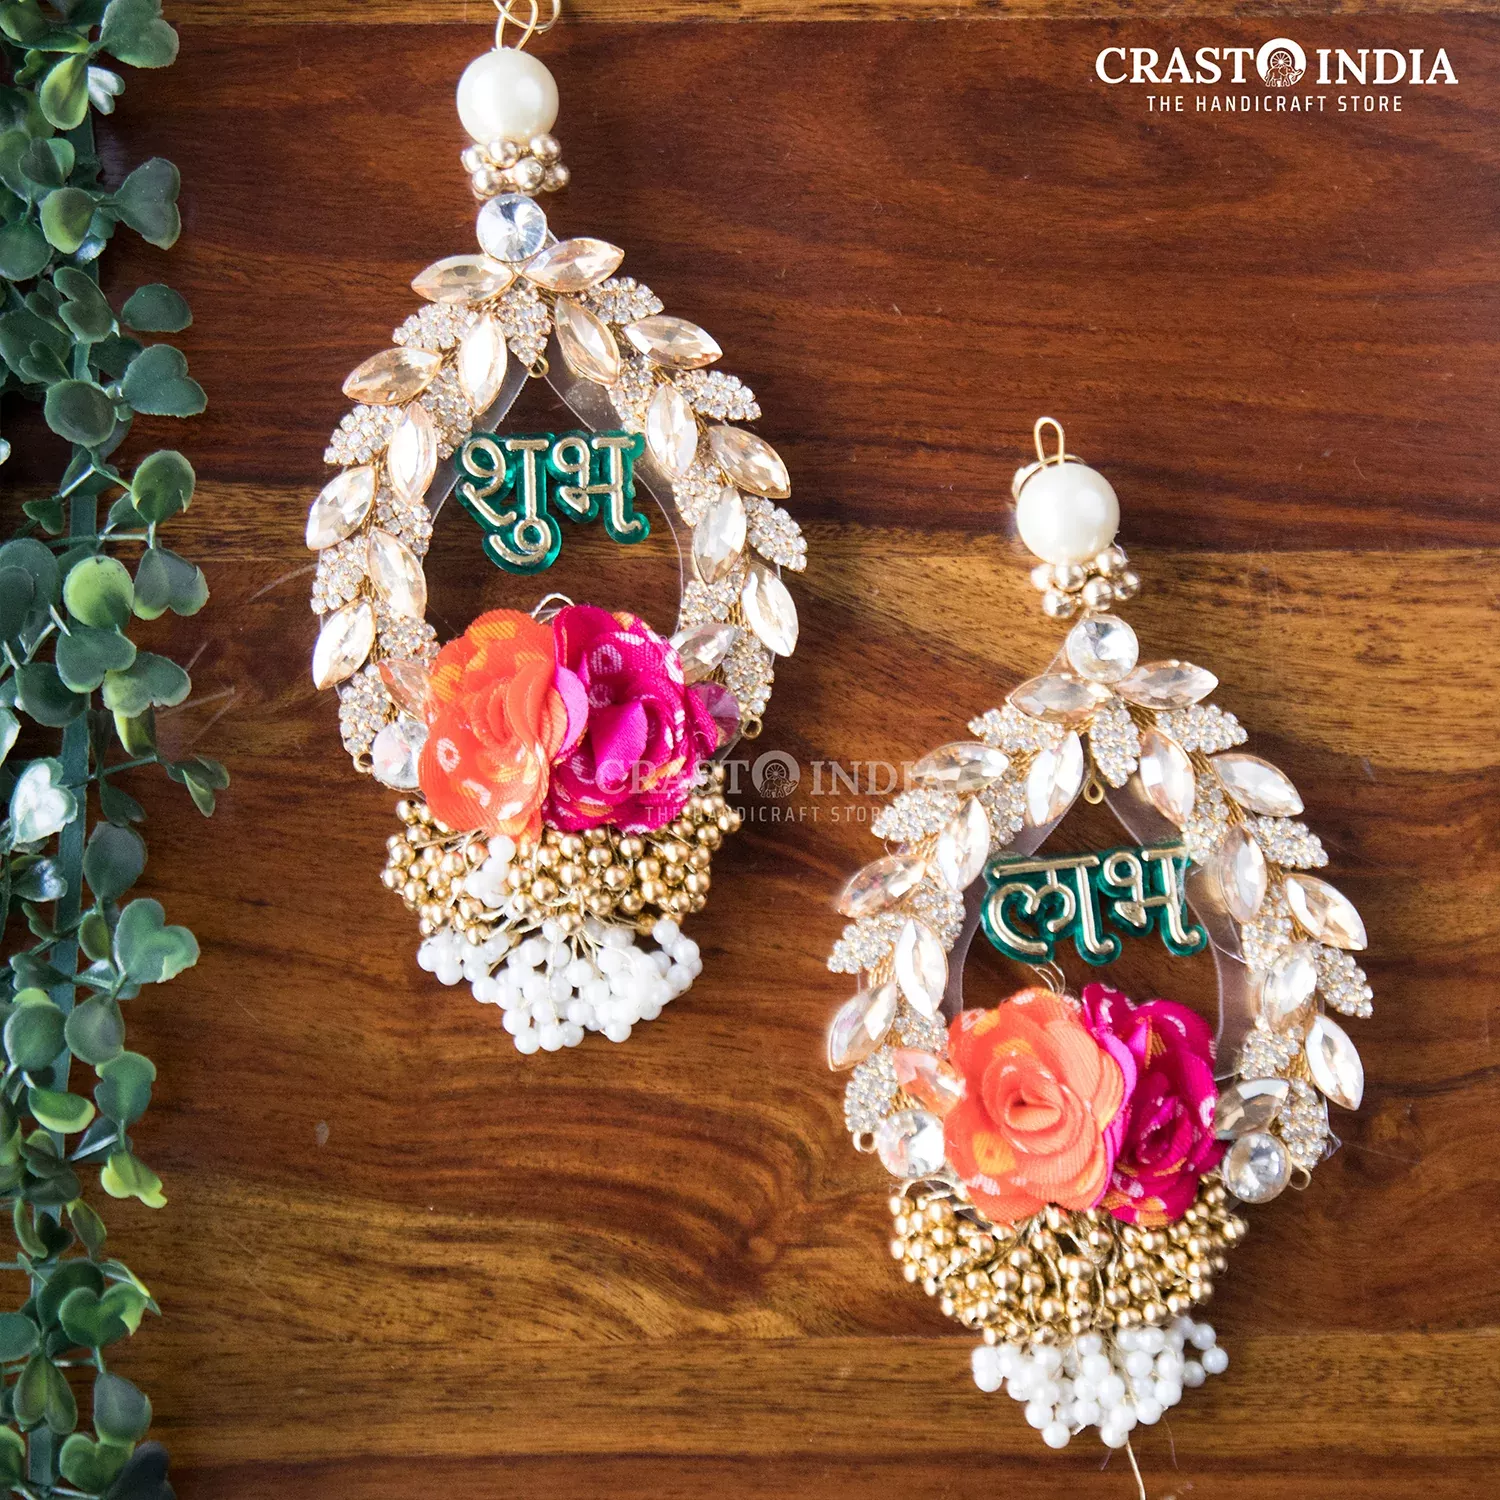 CRASTO INDIA HANDCRAFTED ACRYLIC SHUBH LABH STUDDED WITH EXQUISITE STONES AND BA